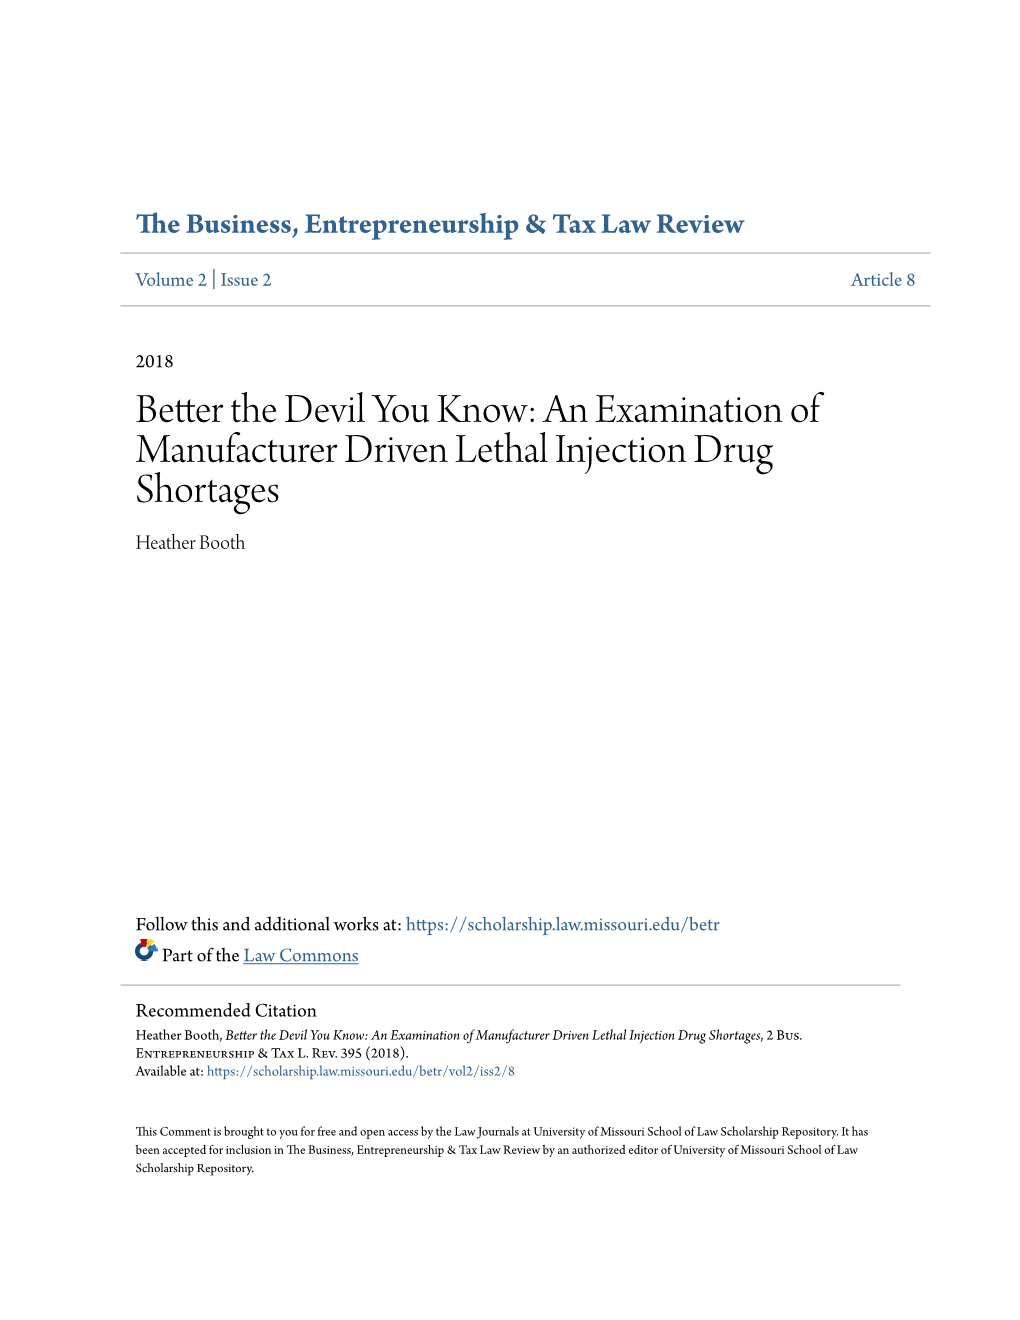 An Examination of Manufacturer Driven Lethal Injection Drug Shortages Heather Booth